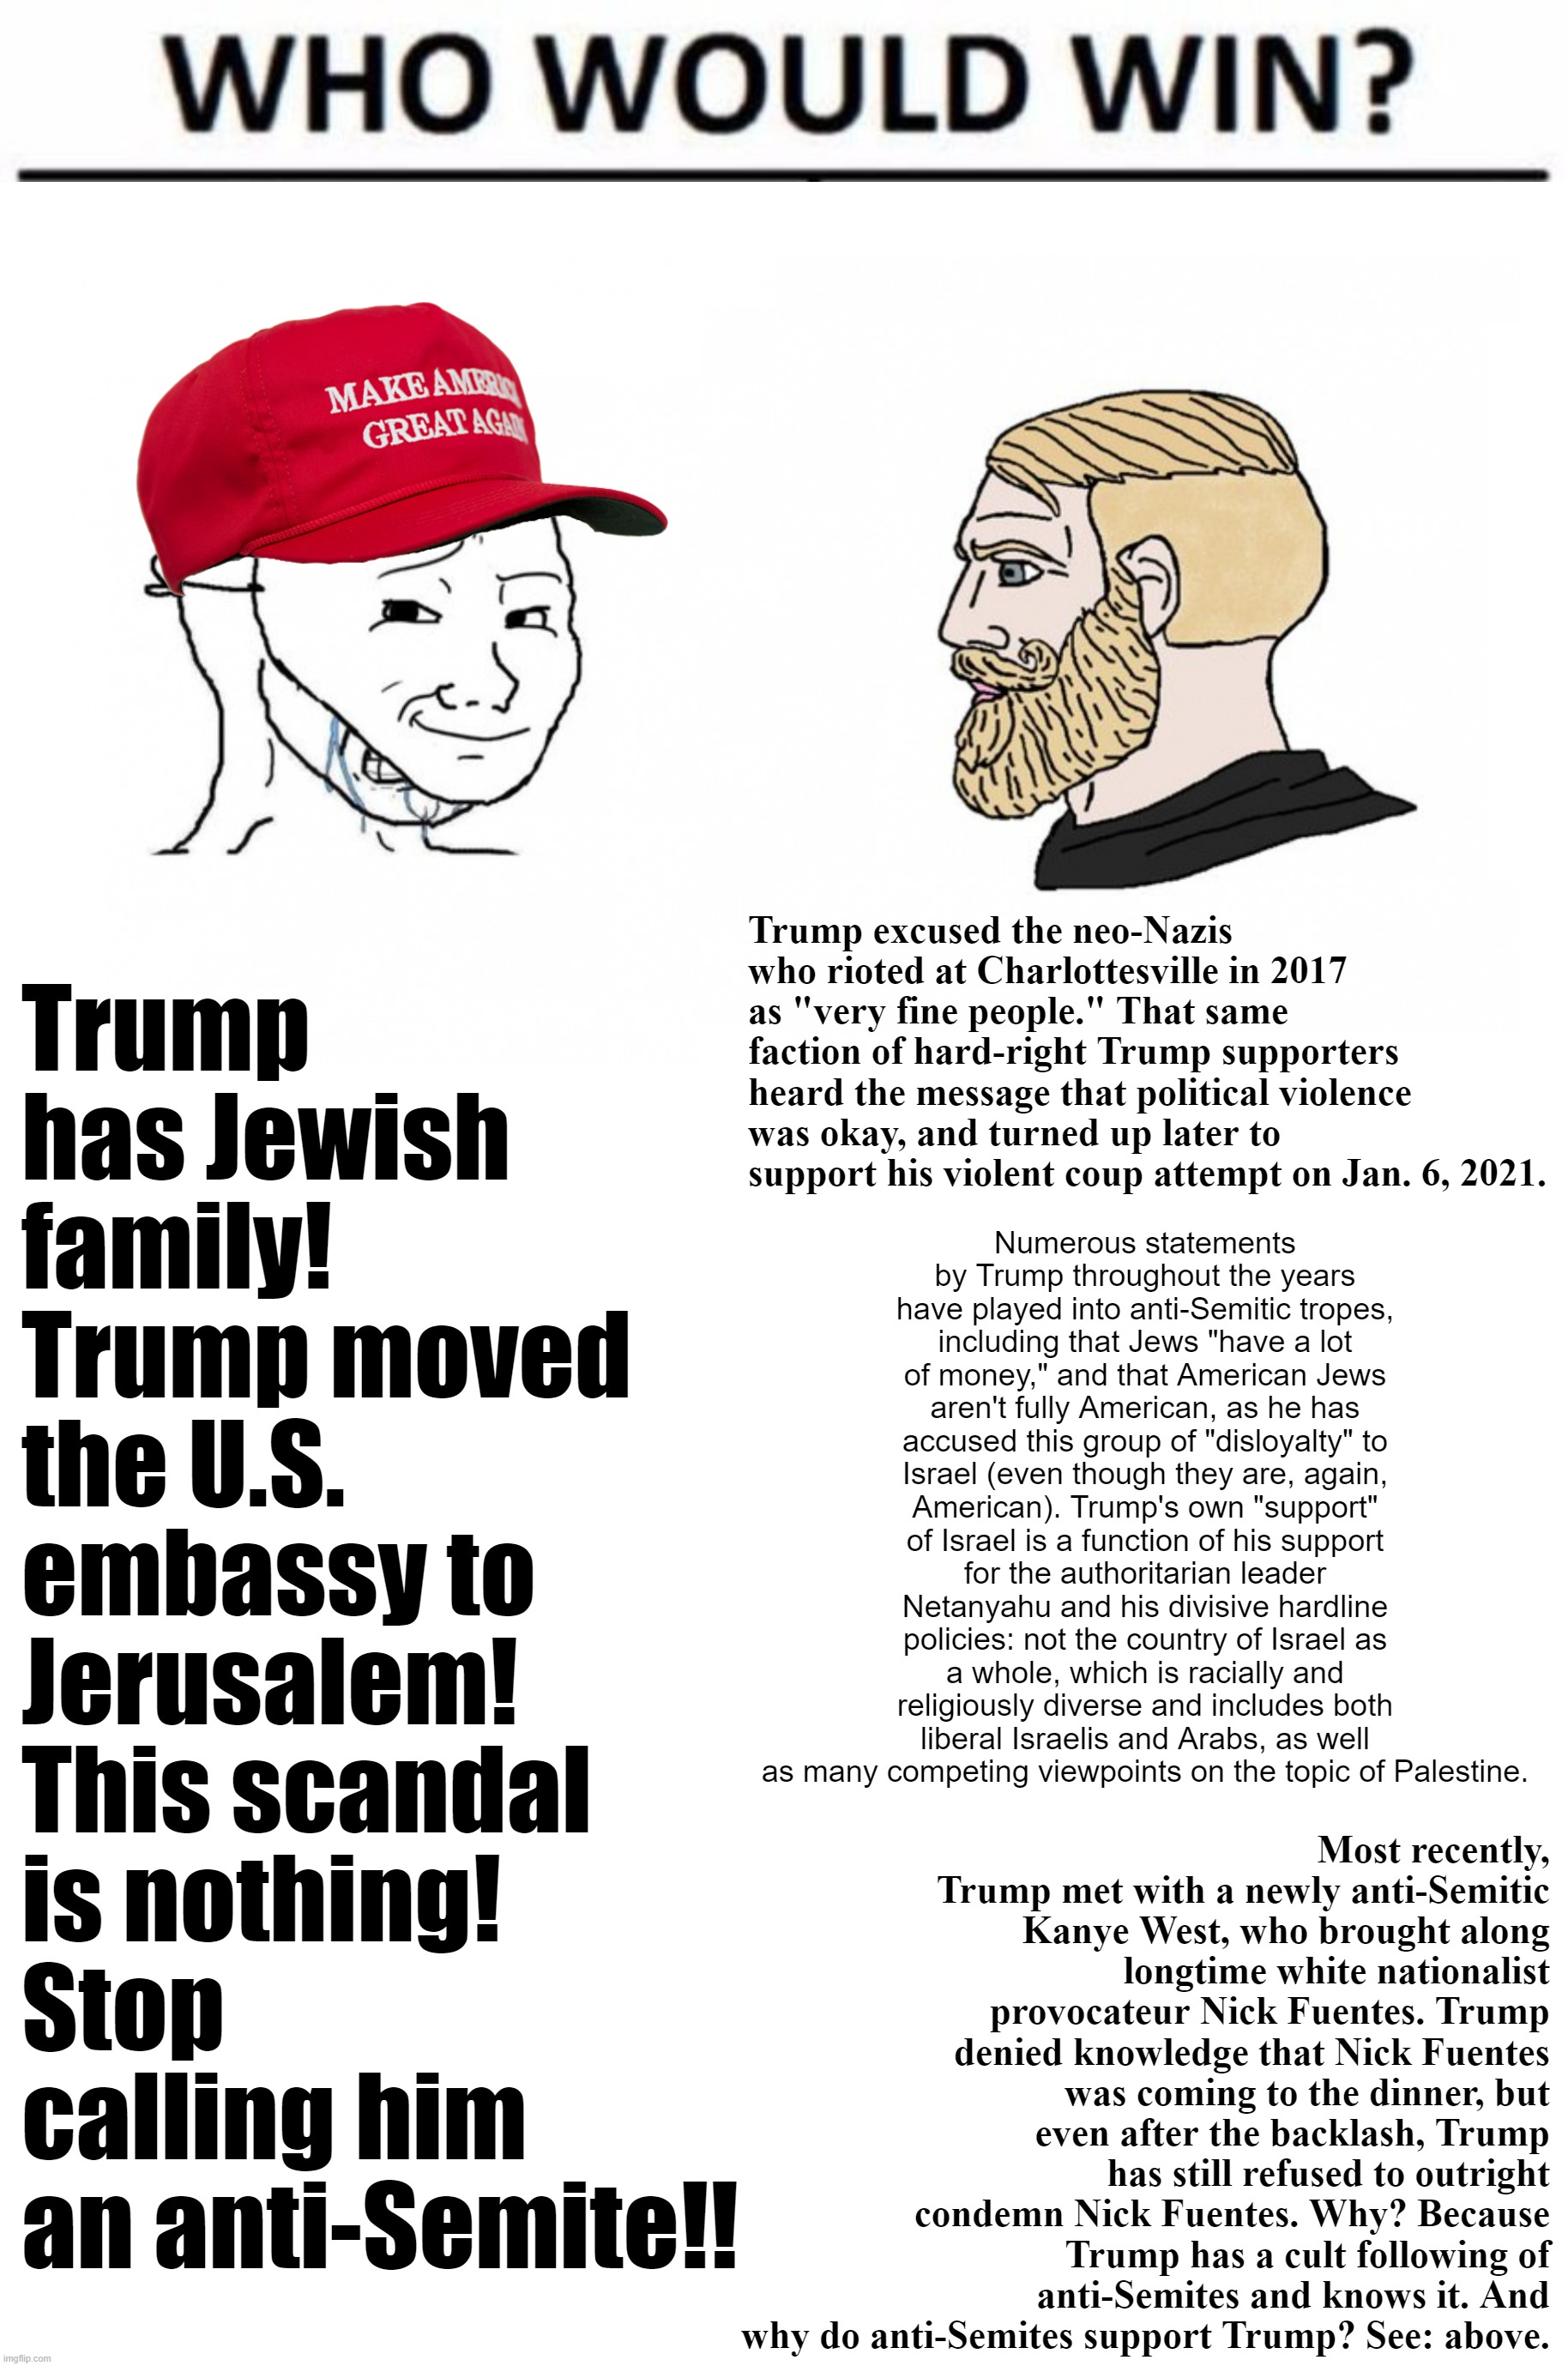 If Trump isn't an anti-Semite, why do the anti-Semites love him so much? | Trump has Jewish family! Trump moved the U.S. embassy to Jerusalem! This scandal is nothing! Stop calling him an anti-Semite!! Trump excused the neo-Nazis who rioted at Charlottesville in 2017 as "very fine people." That same faction of hard-right Trump supporters heard the message that political violence was okay, and turned up later to support his violent coup attempt on Jan. 6, 2021. Numerous statements by Trump throughout the years have played into anti-Semitic tropes, including that Jews "have a lot of money," and that American Jews aren't fully American, as he has accused this group of "disloyalty" to Israel (even though they are, again, American). Trump's own "support" of Israel is a function of his support for the authoritarian leader Netanyahu and his divisive hardline policies: not the country of Israel as a whole, which is racially and religiously diverse and includes both liberal Israelis and Arabs, as well as many competing viewpoints on the topic of Palestine. Most recently, Trump met with a newly anti-Semitic Kanye West, who brought along longtime white nationalist provocateur Nick Fuentes. Trump denied knowledge that Nick Fuentes was coming to the dinner, but even after the backlash, Trump has still refused to outright condemn Nick Fuentes. Why? Because Trump has a cult following of anti-Semites and knows it. And why do anti-Semites support Trump? See: above. | image tagged in anti-semite and a racist,anti-semitism,trump is an asshole,trump is a moron,neo-nazis,white nationalism | made w/ Imgflip meme maker